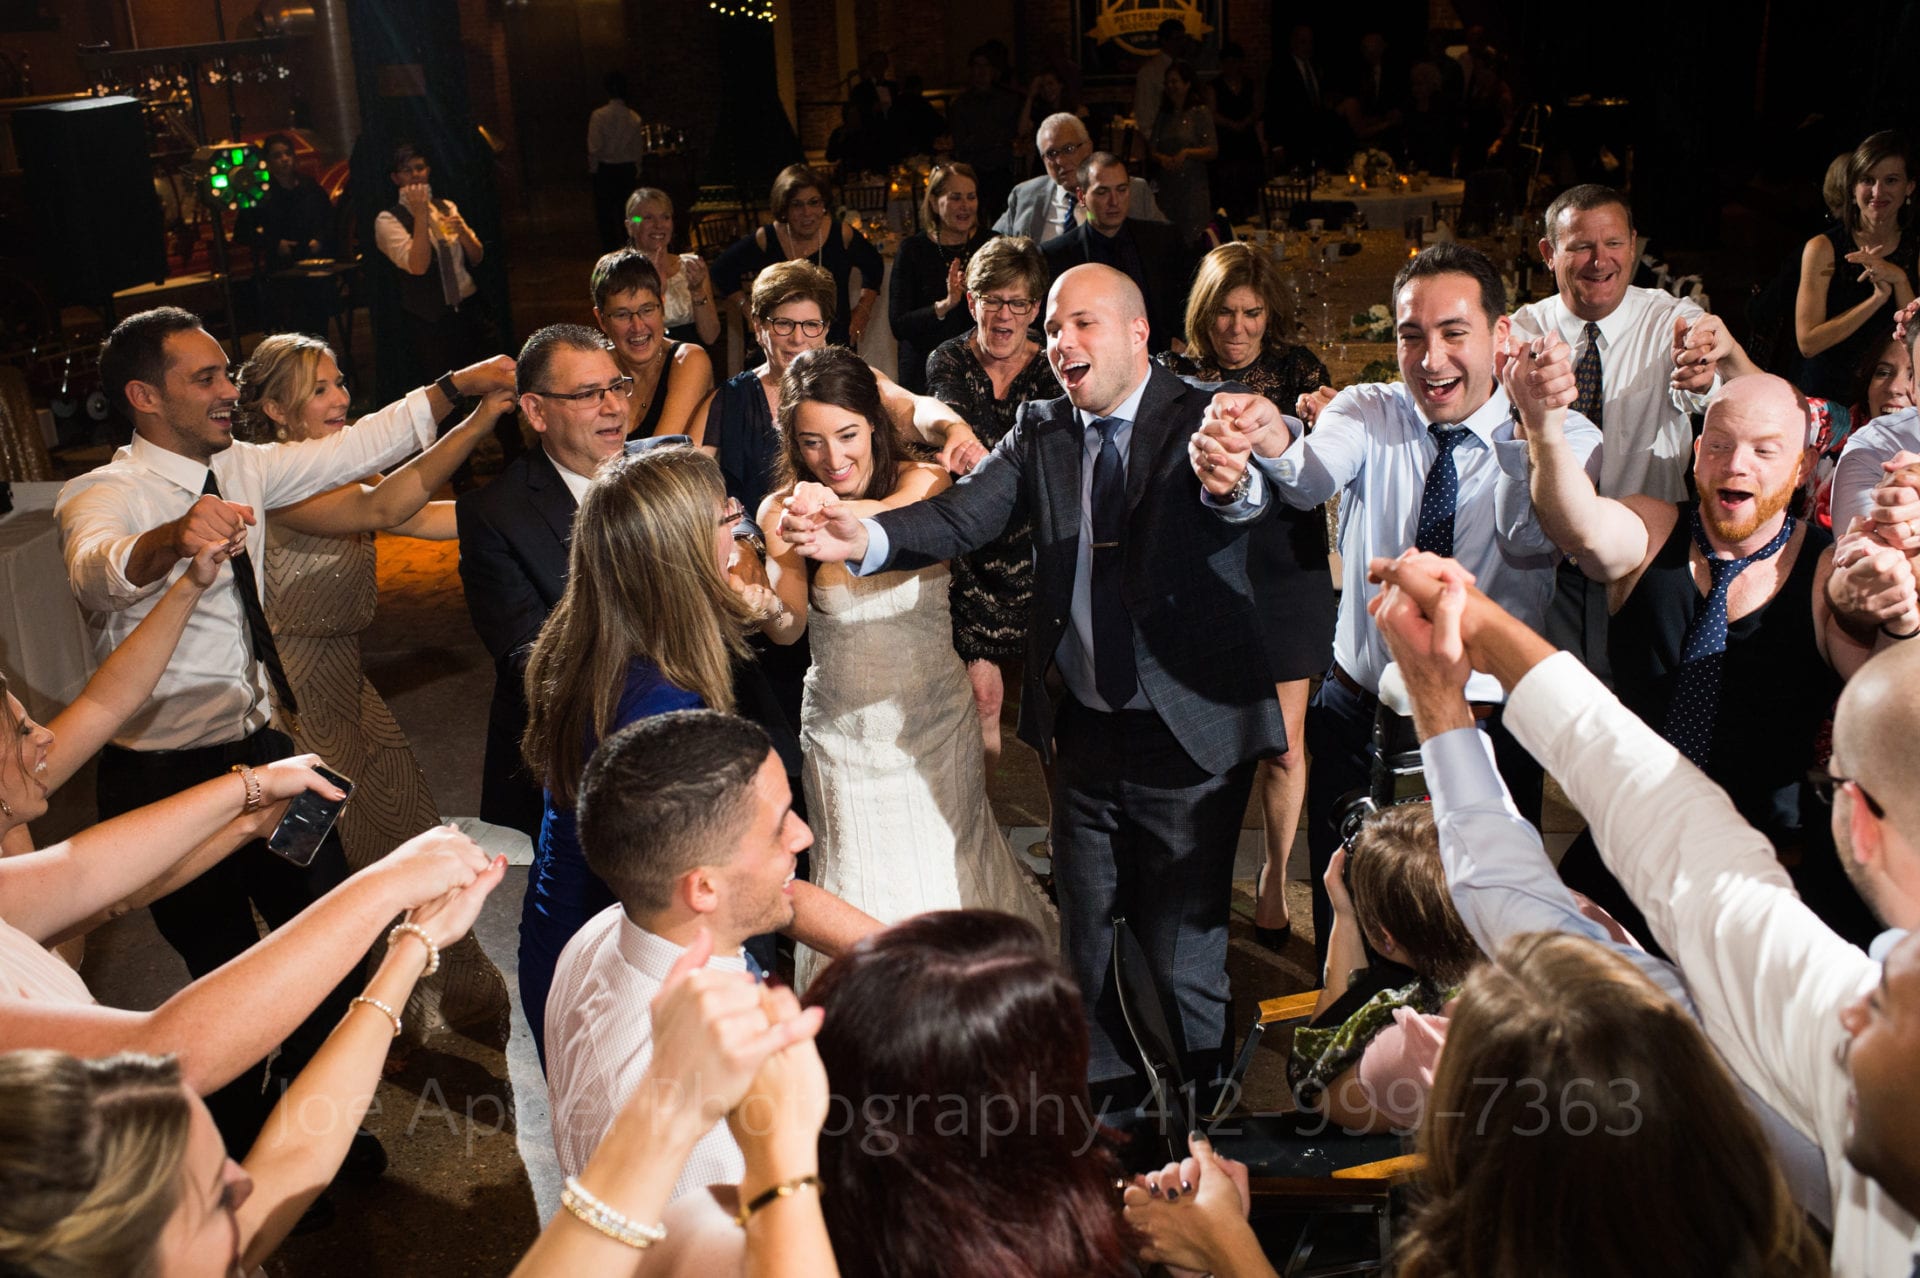 A bride and groom hold hands with their guests as they dance. Photo is seen from above.